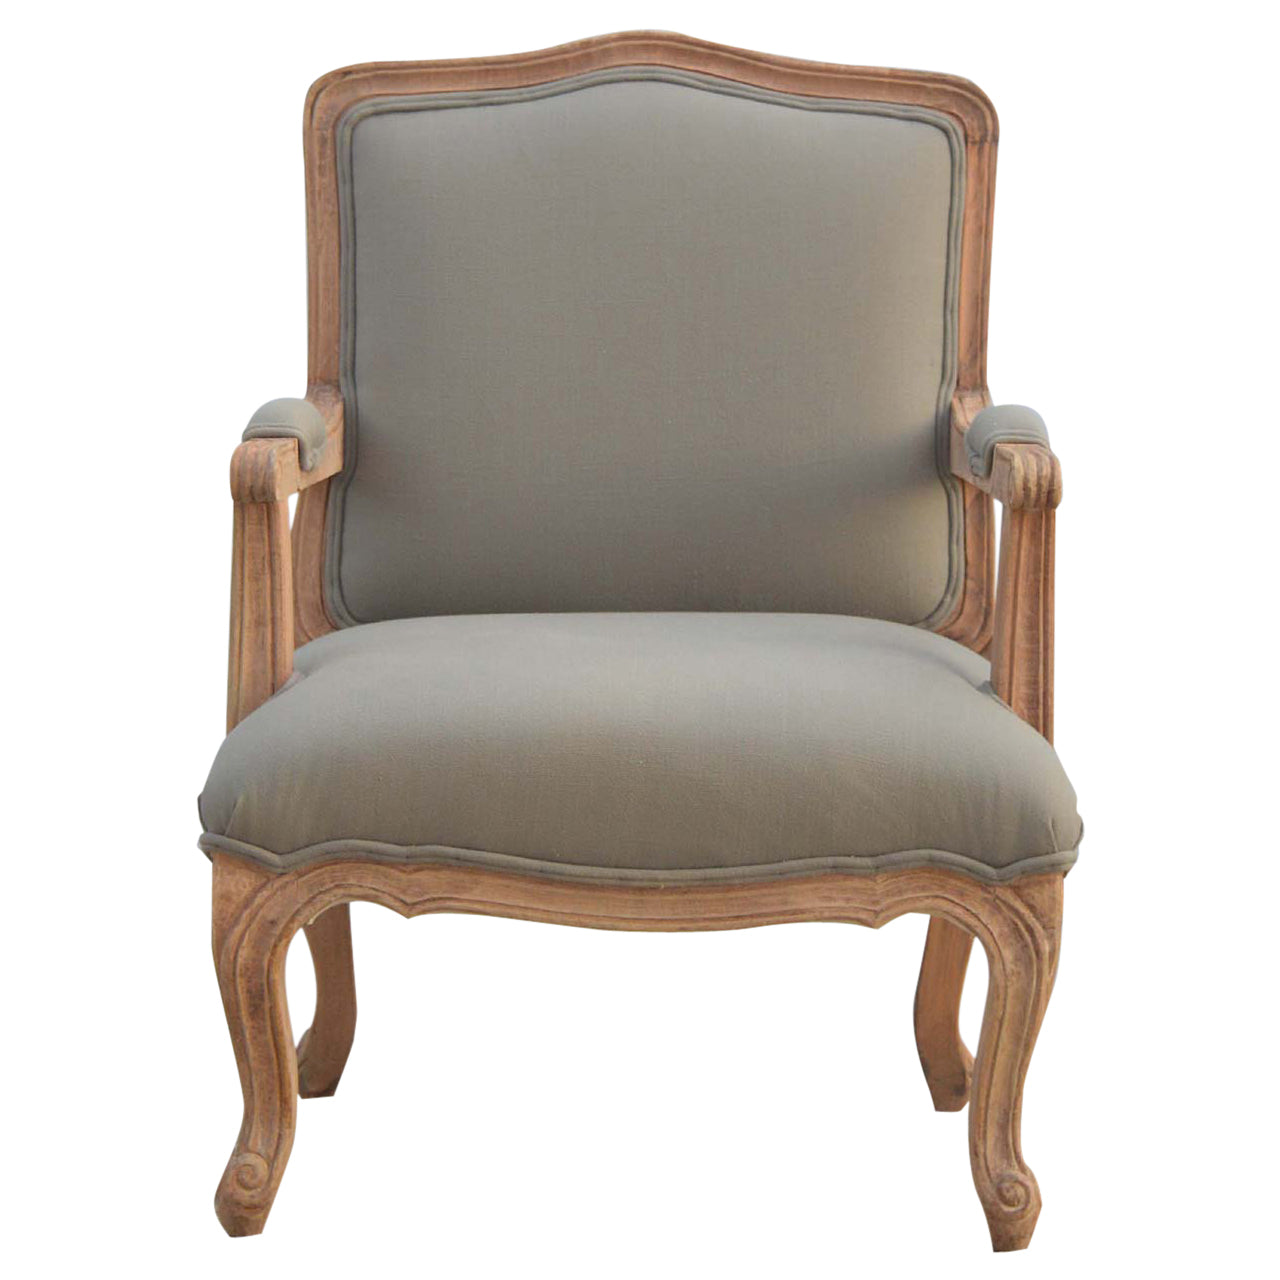 View French Style Upholstered Armchair information